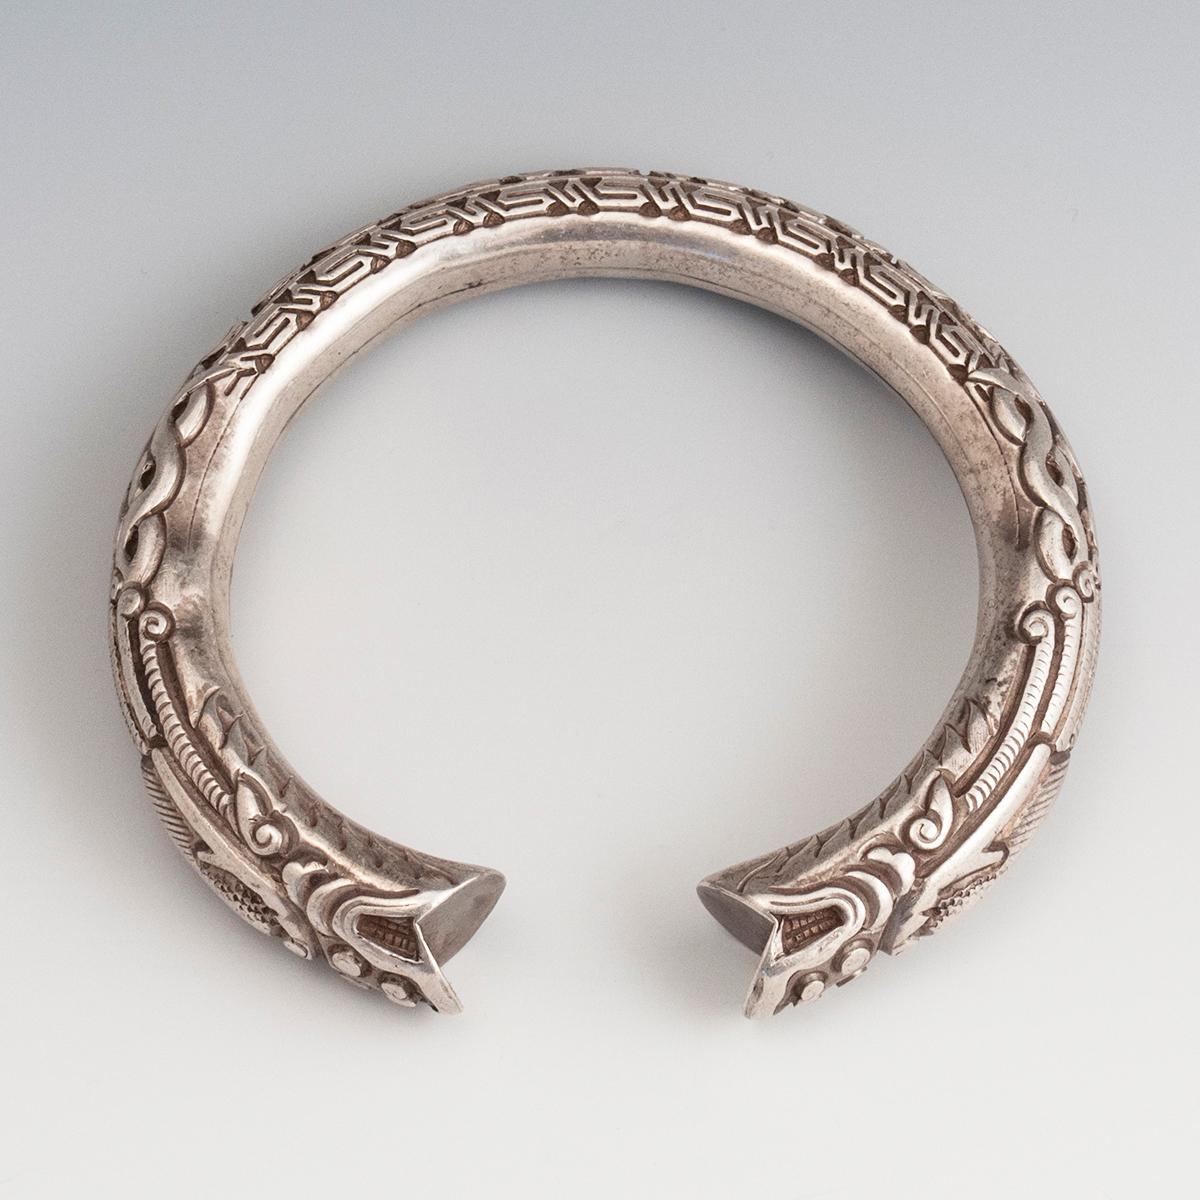 Chinese Late 19th-Early 20th Century Silver Bangle Dragon Bracelet, China